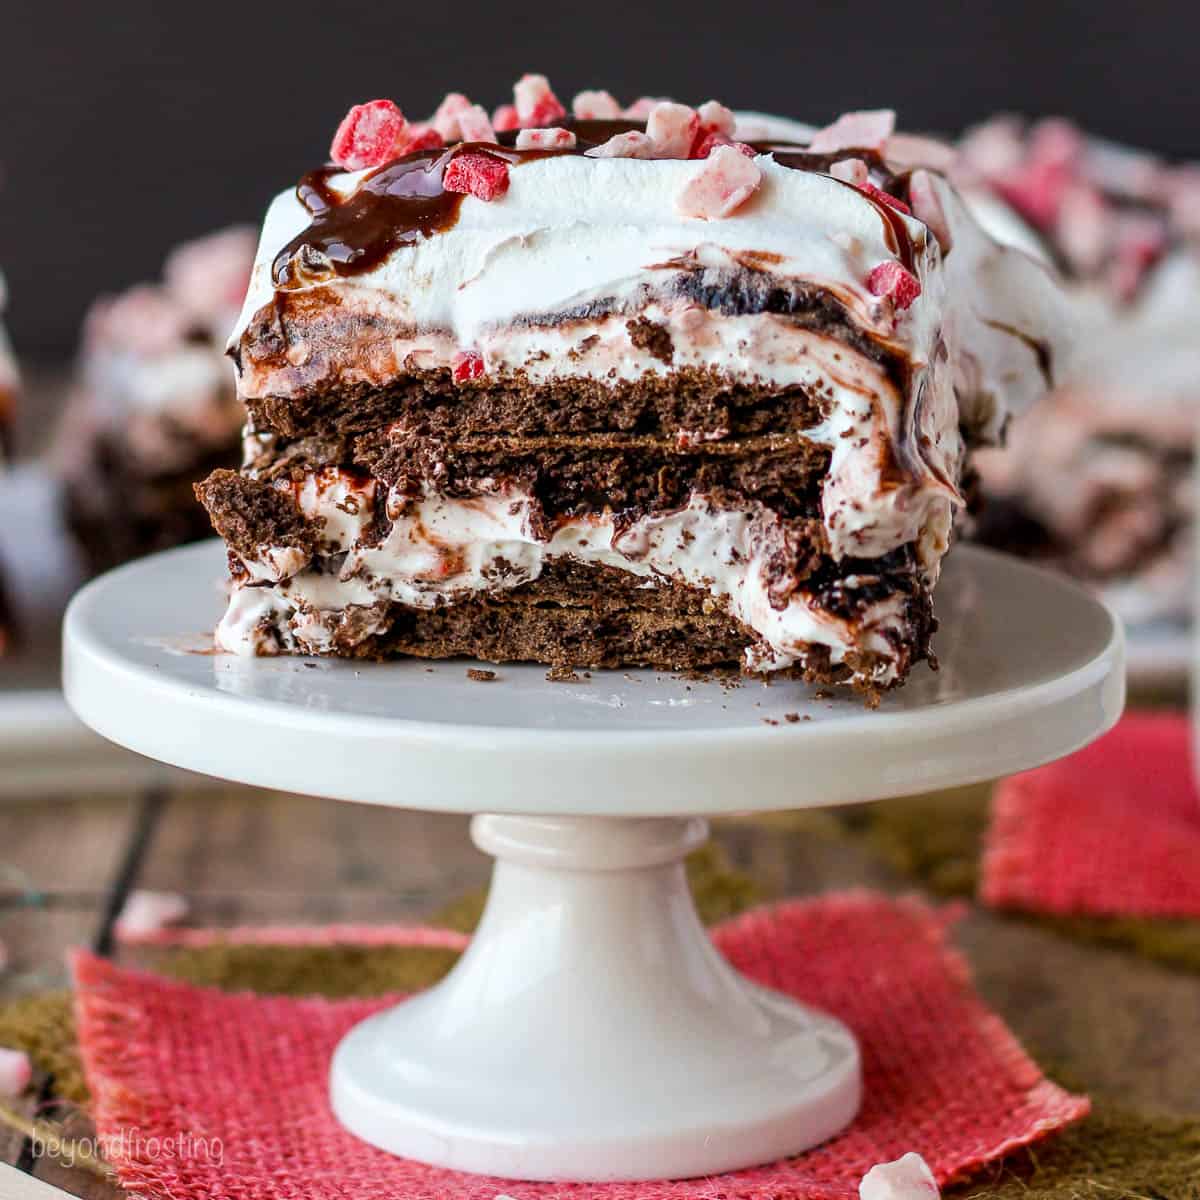 Lasagna Made of CAKE | Raspberry Buttercream, Choco Rice Puffs | We're  having dessert for dinner! Dinner just got a whole lot sweeter and we are  here for it! Our lasagna cake